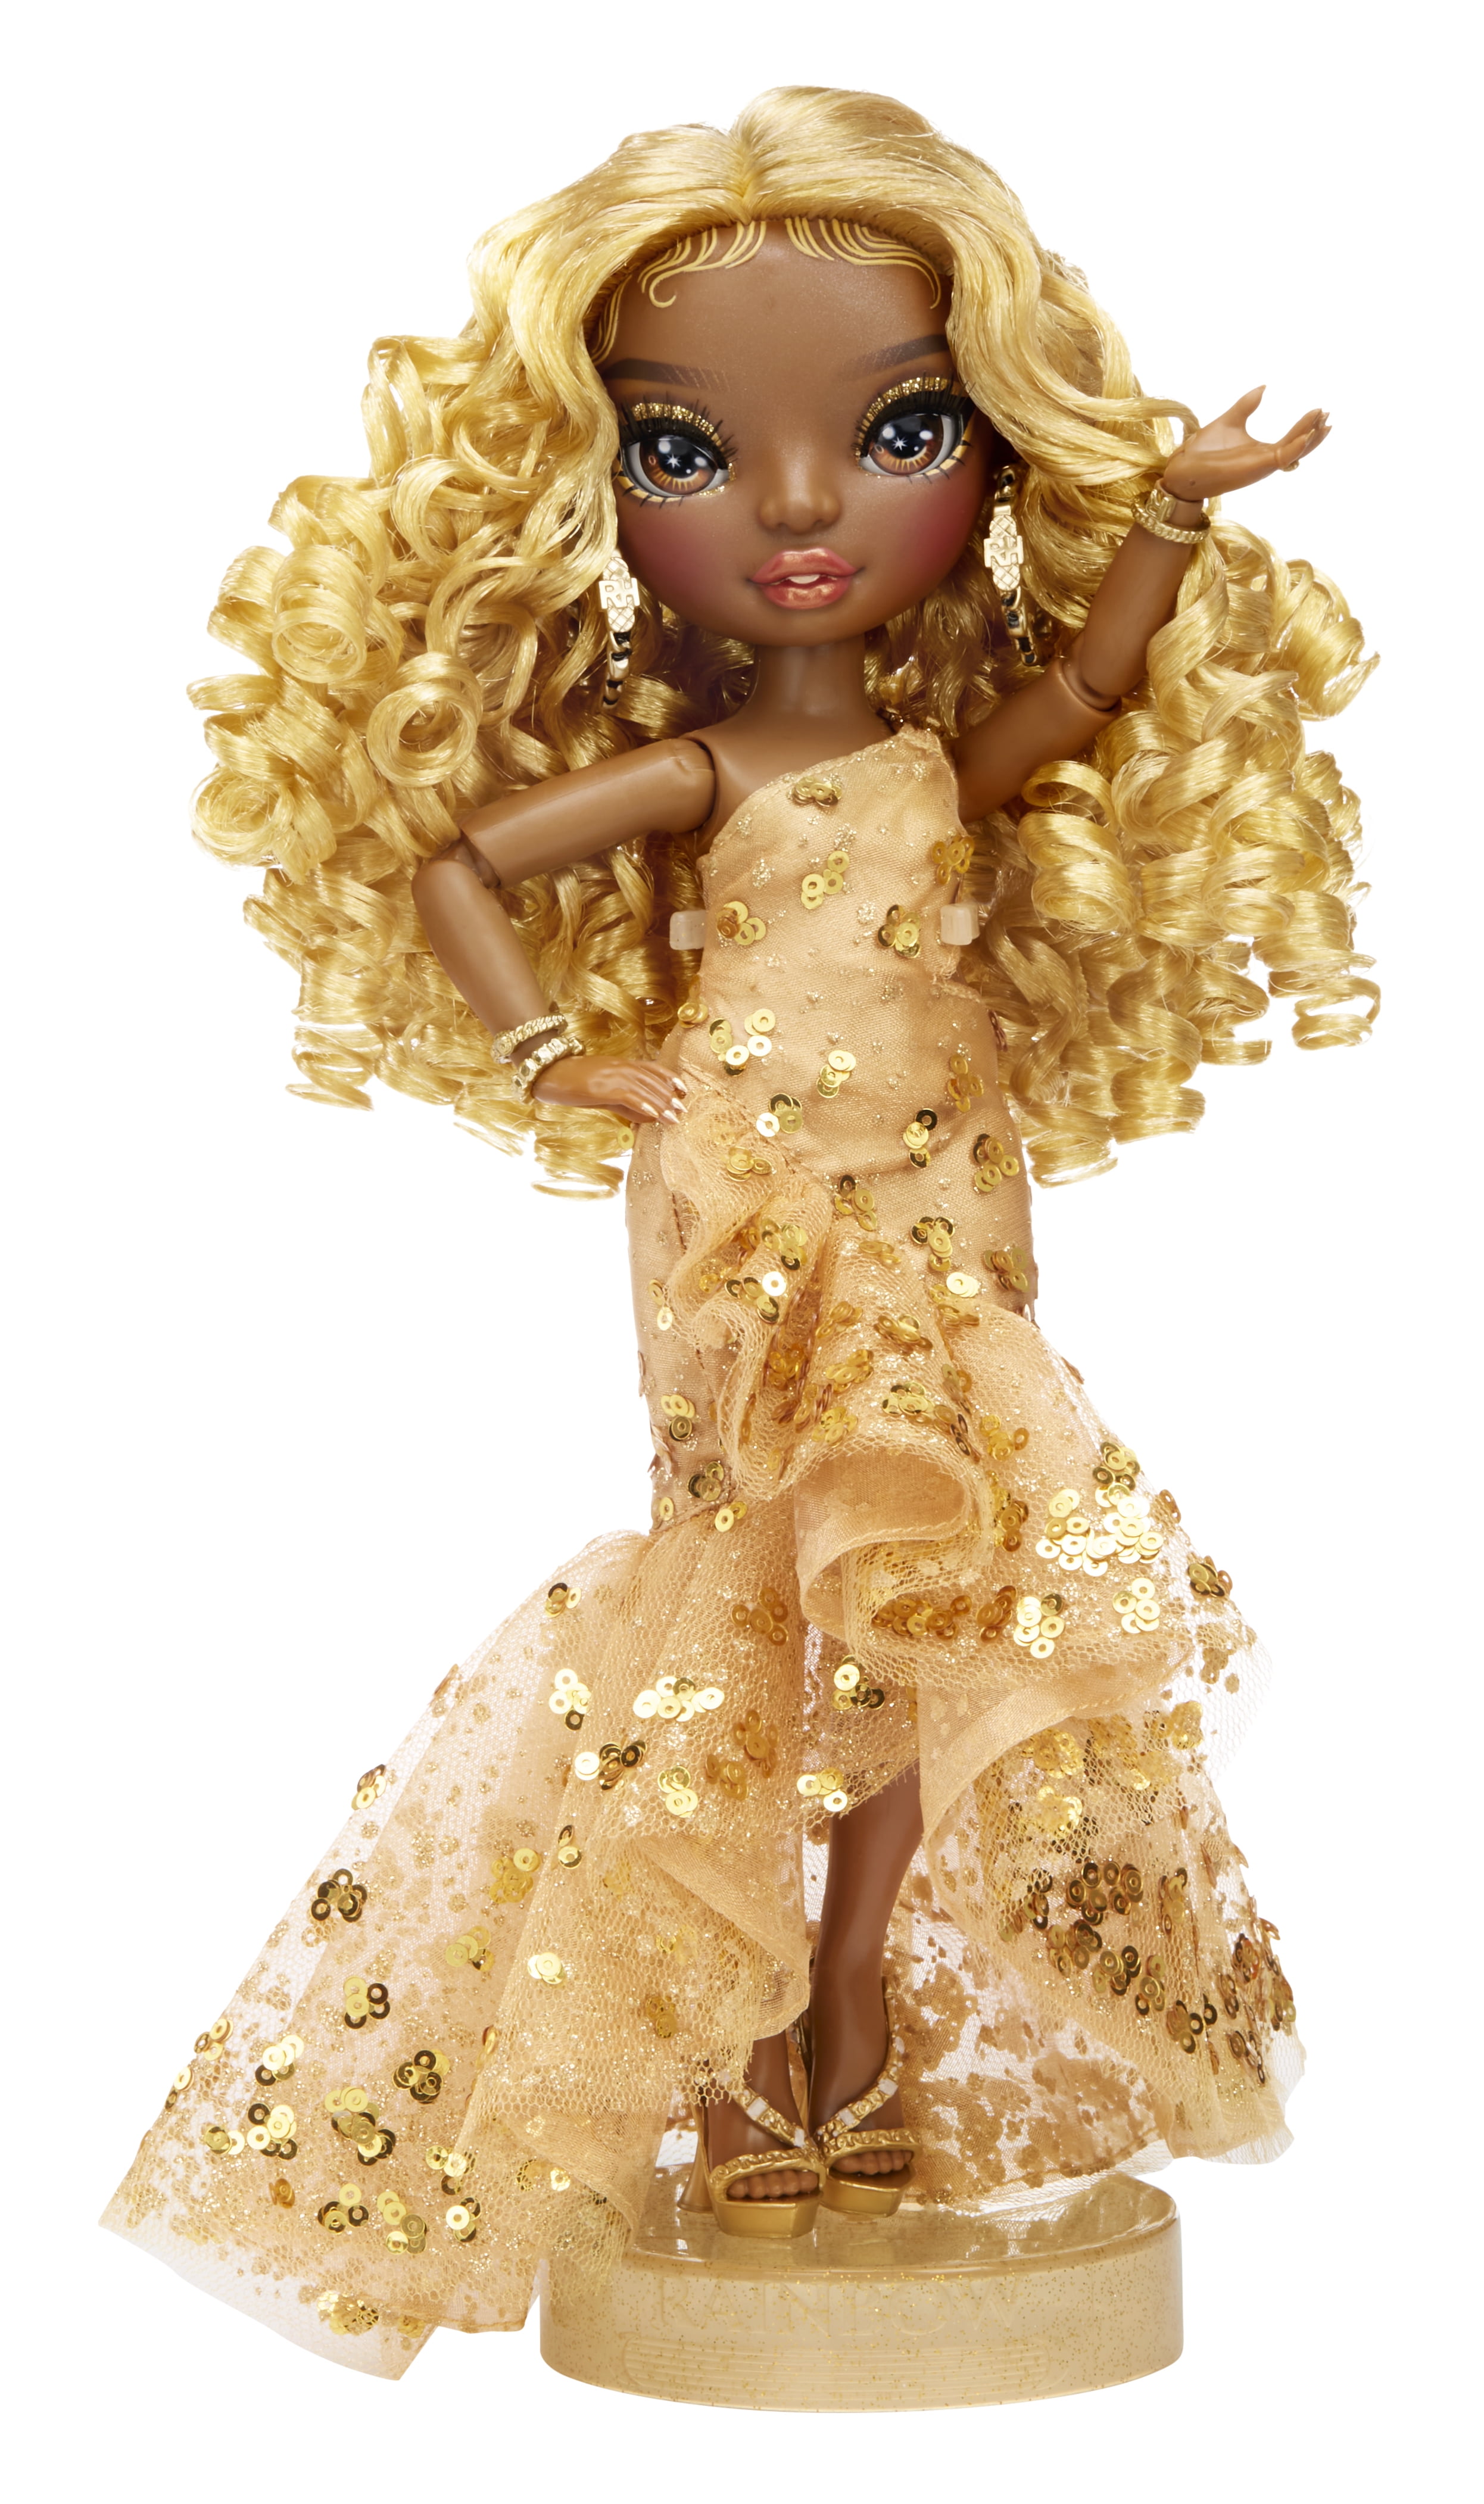 Rainbow Vision Rainbow High Rainbow Divas- Meline Luxe (Gold Yellow) Fashion Doll. 2 Designer Outfits to Mix & Match with Vanity PLAYSET, Great Gift for Kids 6-12 Years Old & Collectors